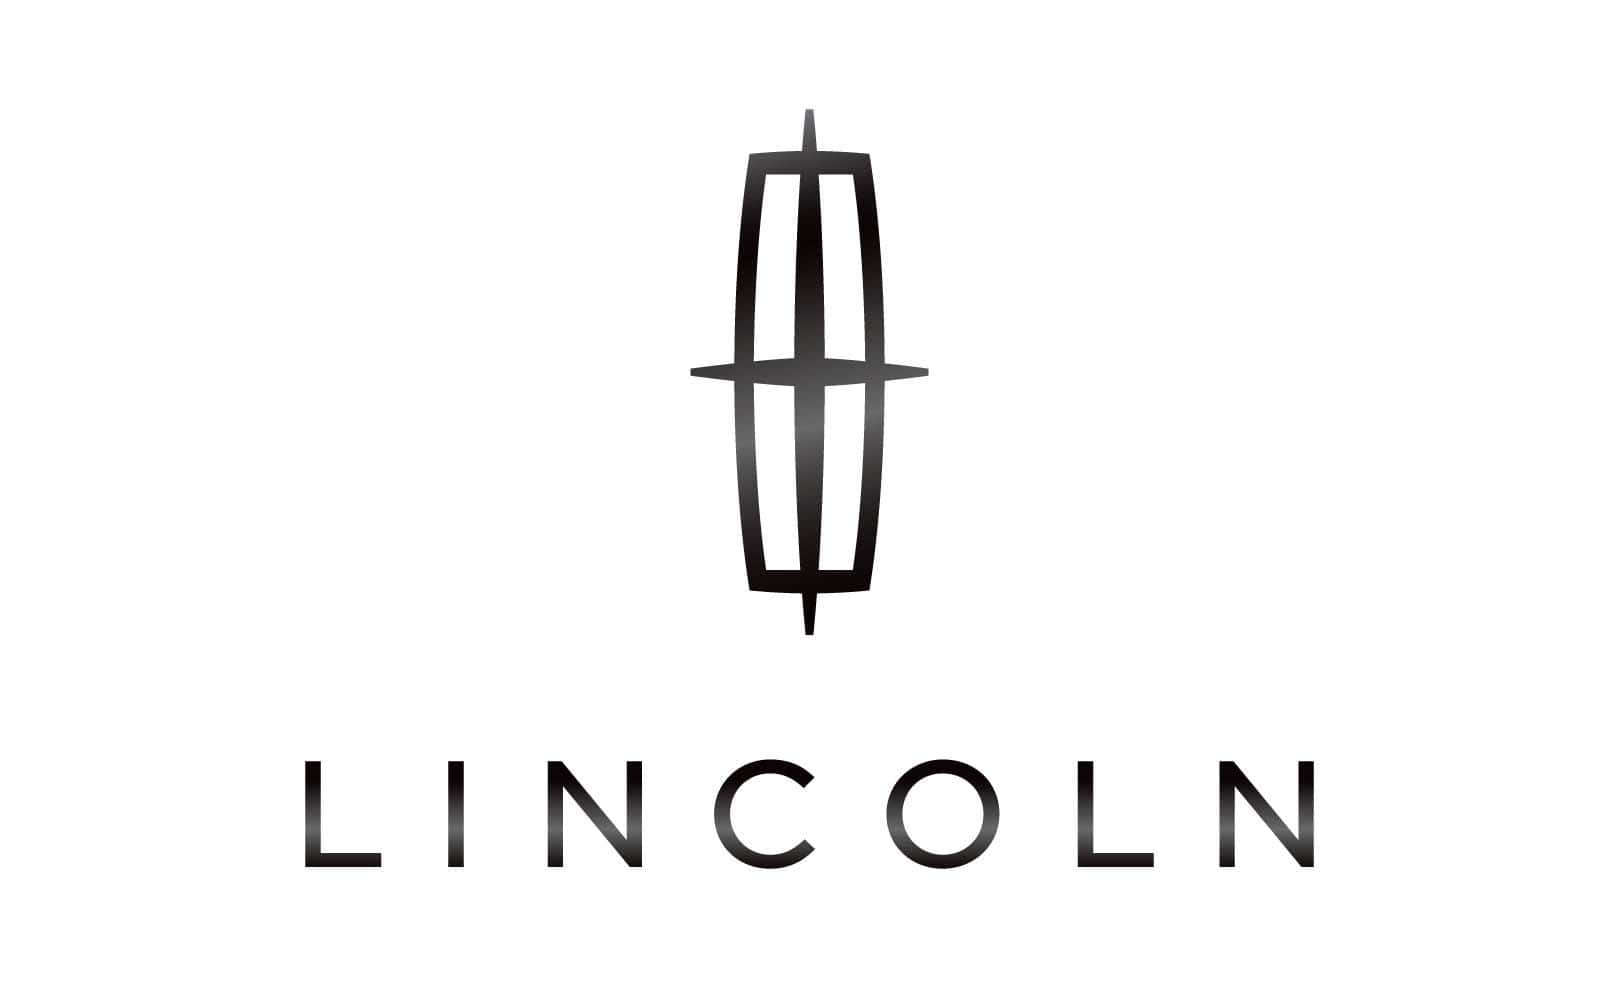 Lincoln spare parts seller